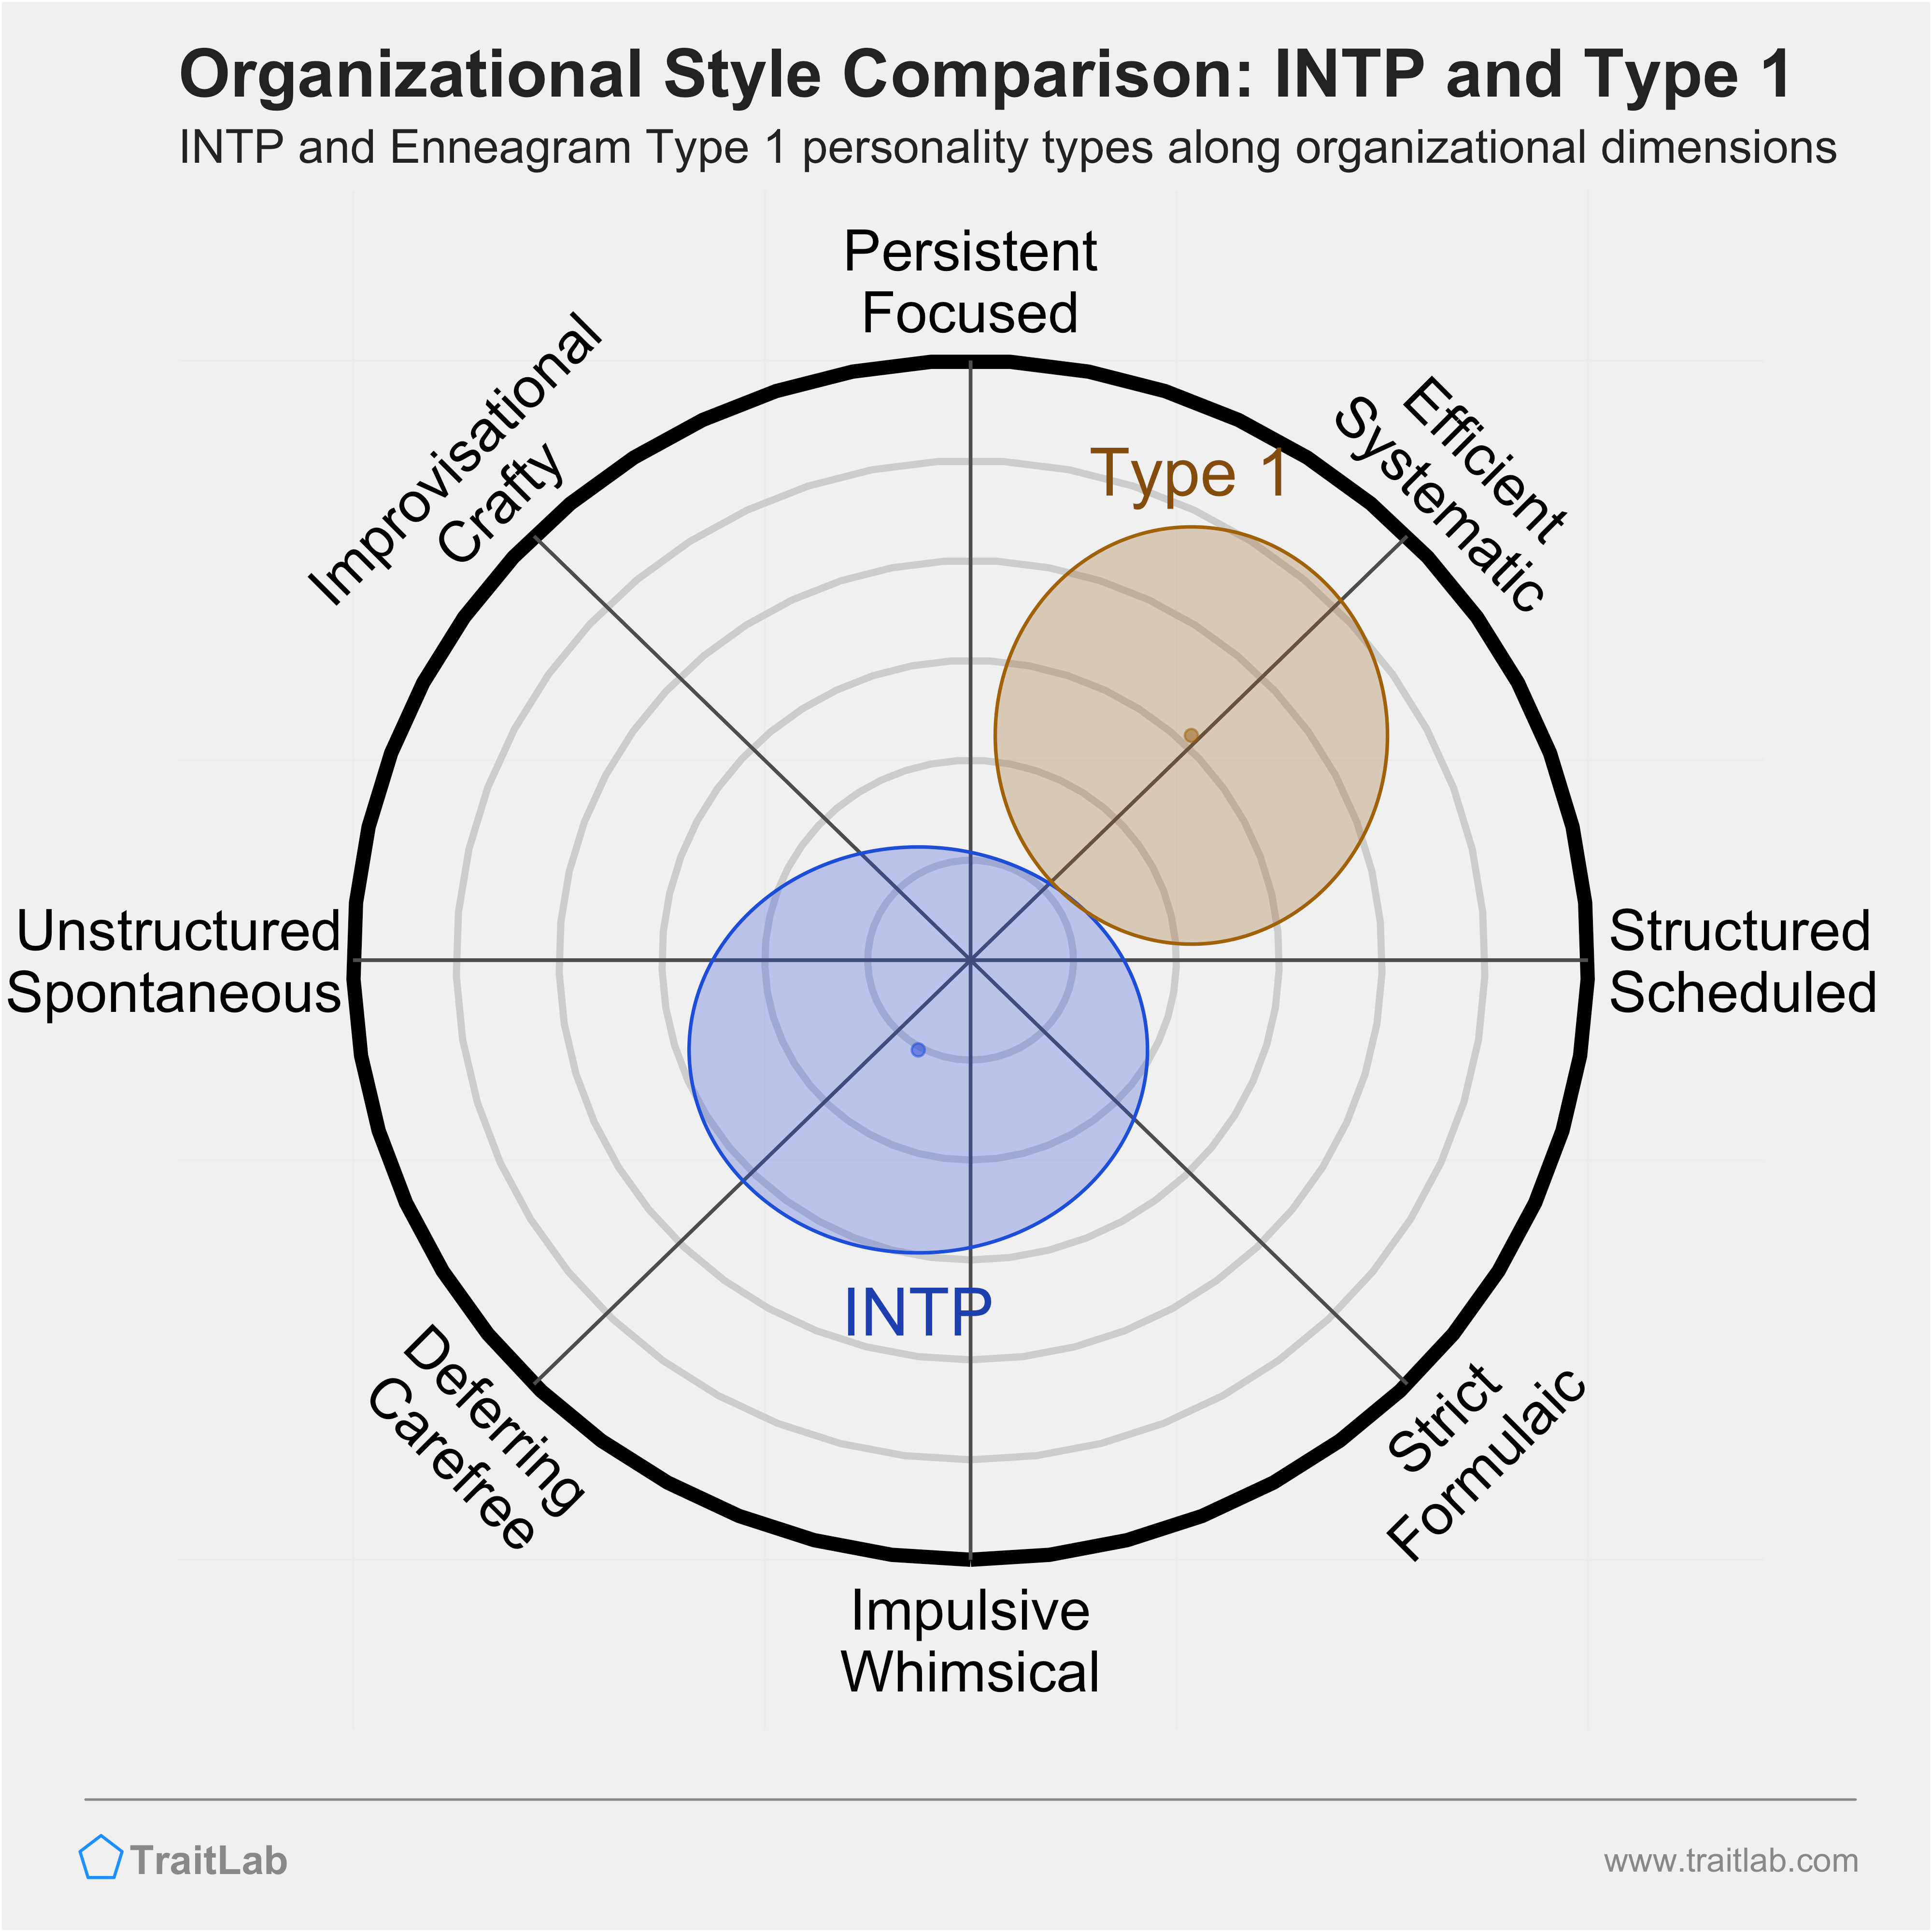 INTP and Type 1 comparison across organizational dimensions